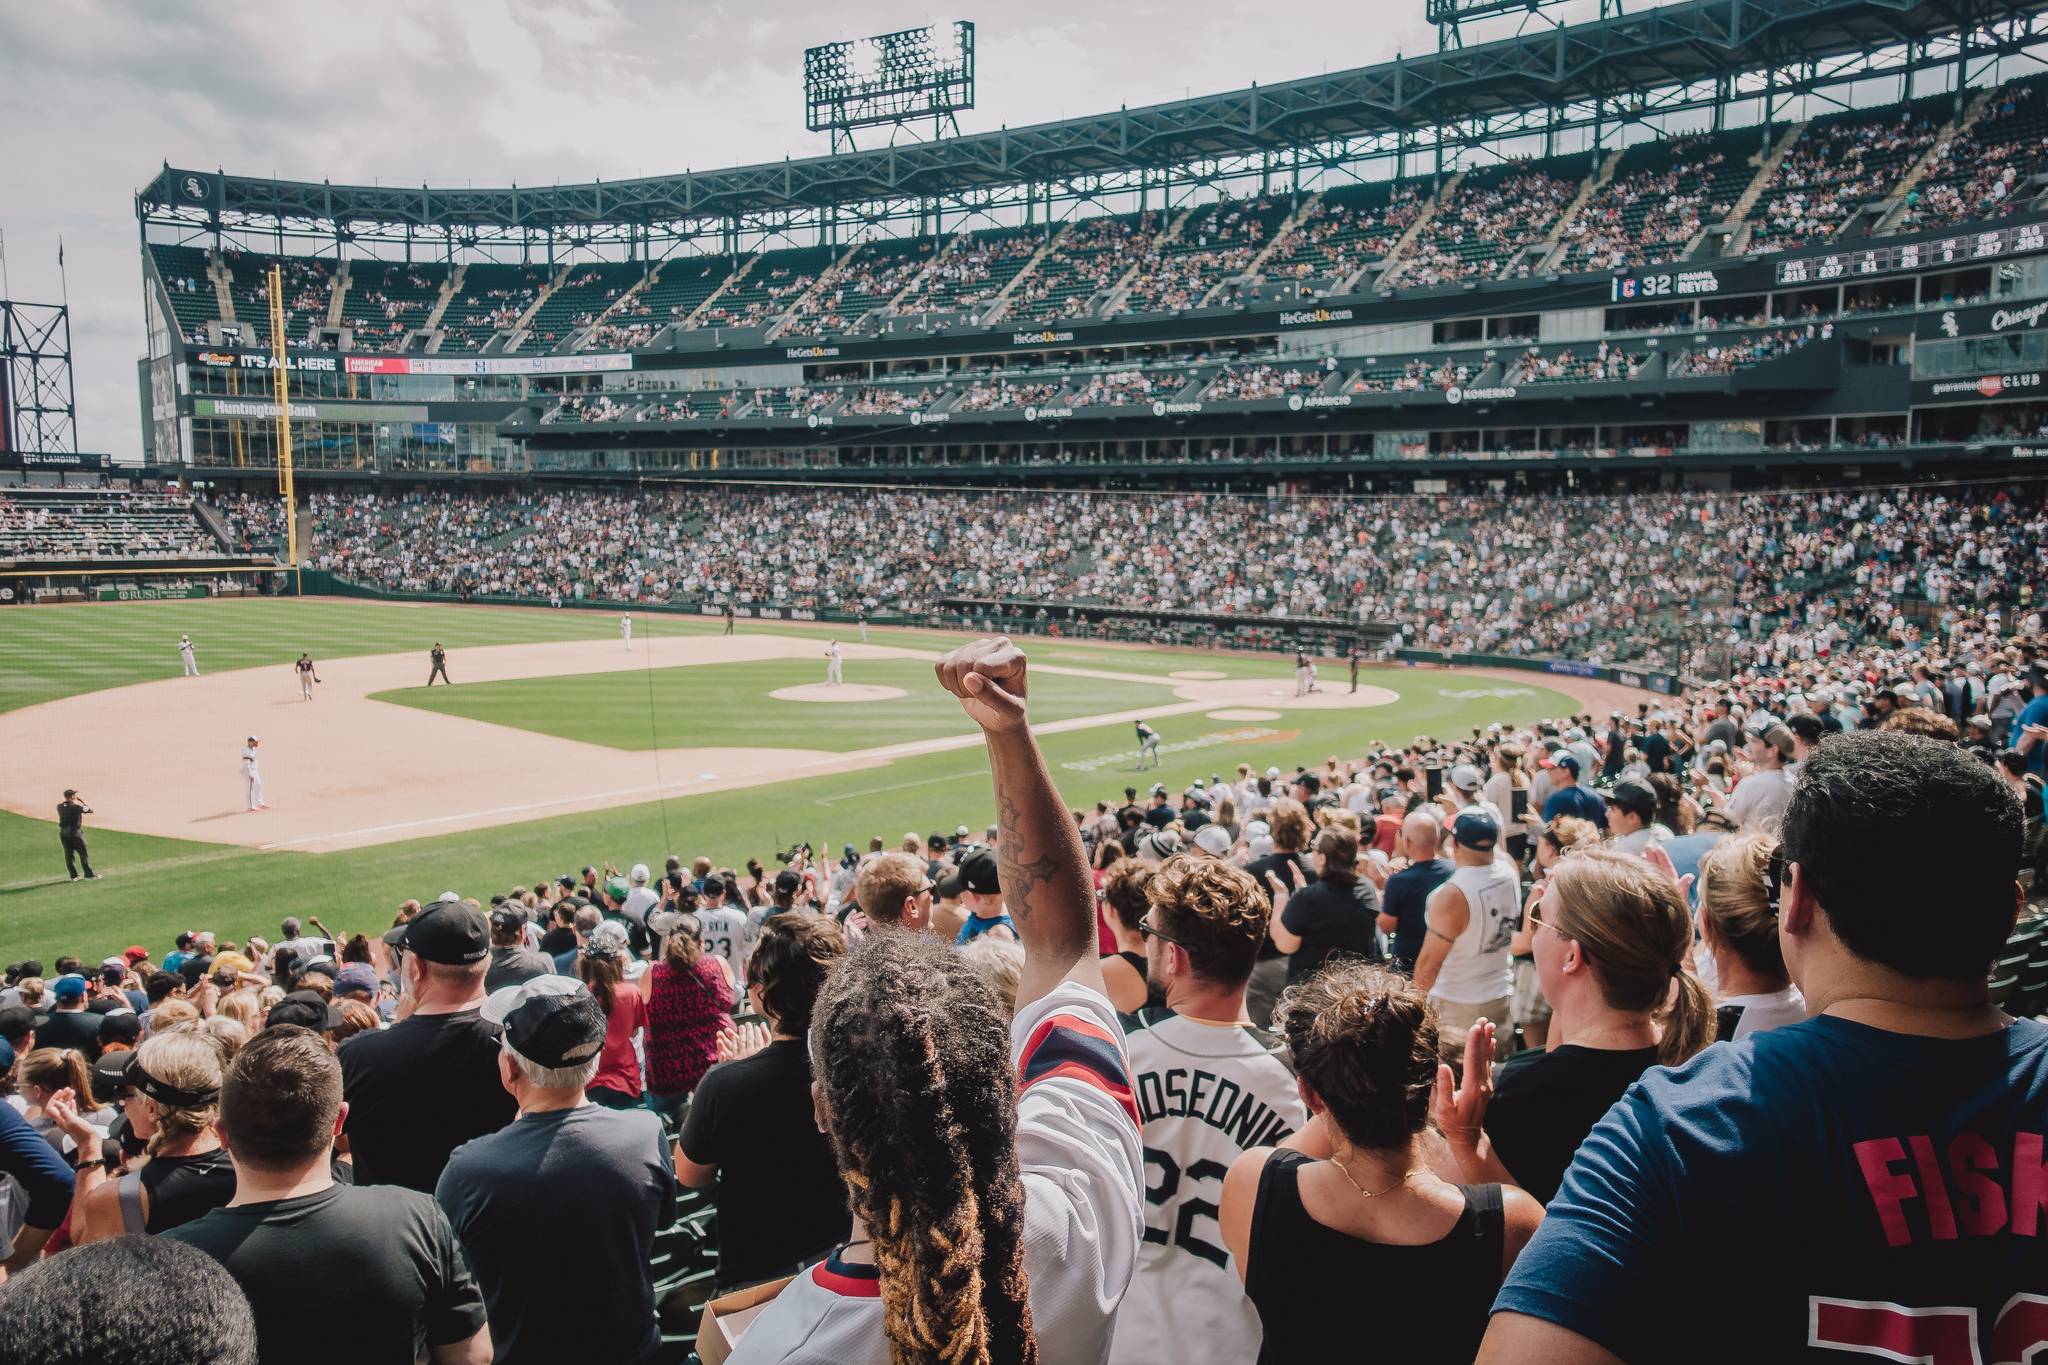 How do Americans align sports fandom with their values?